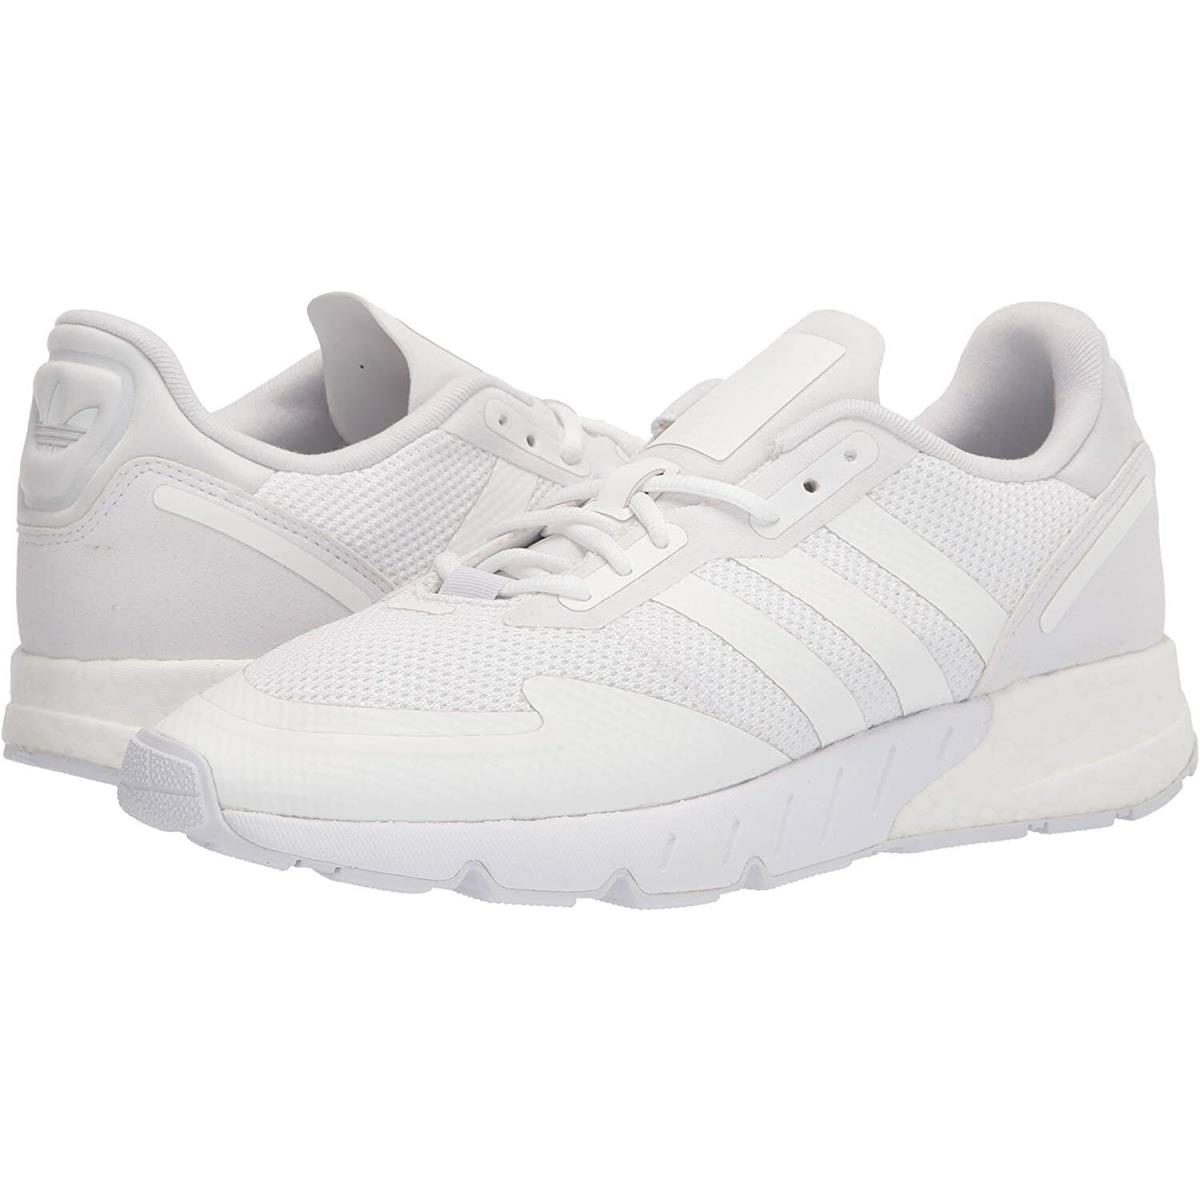 Men`s Shoes Adidas Originals ZX 1K Boost Athletic Sneakers FX6516 White - White